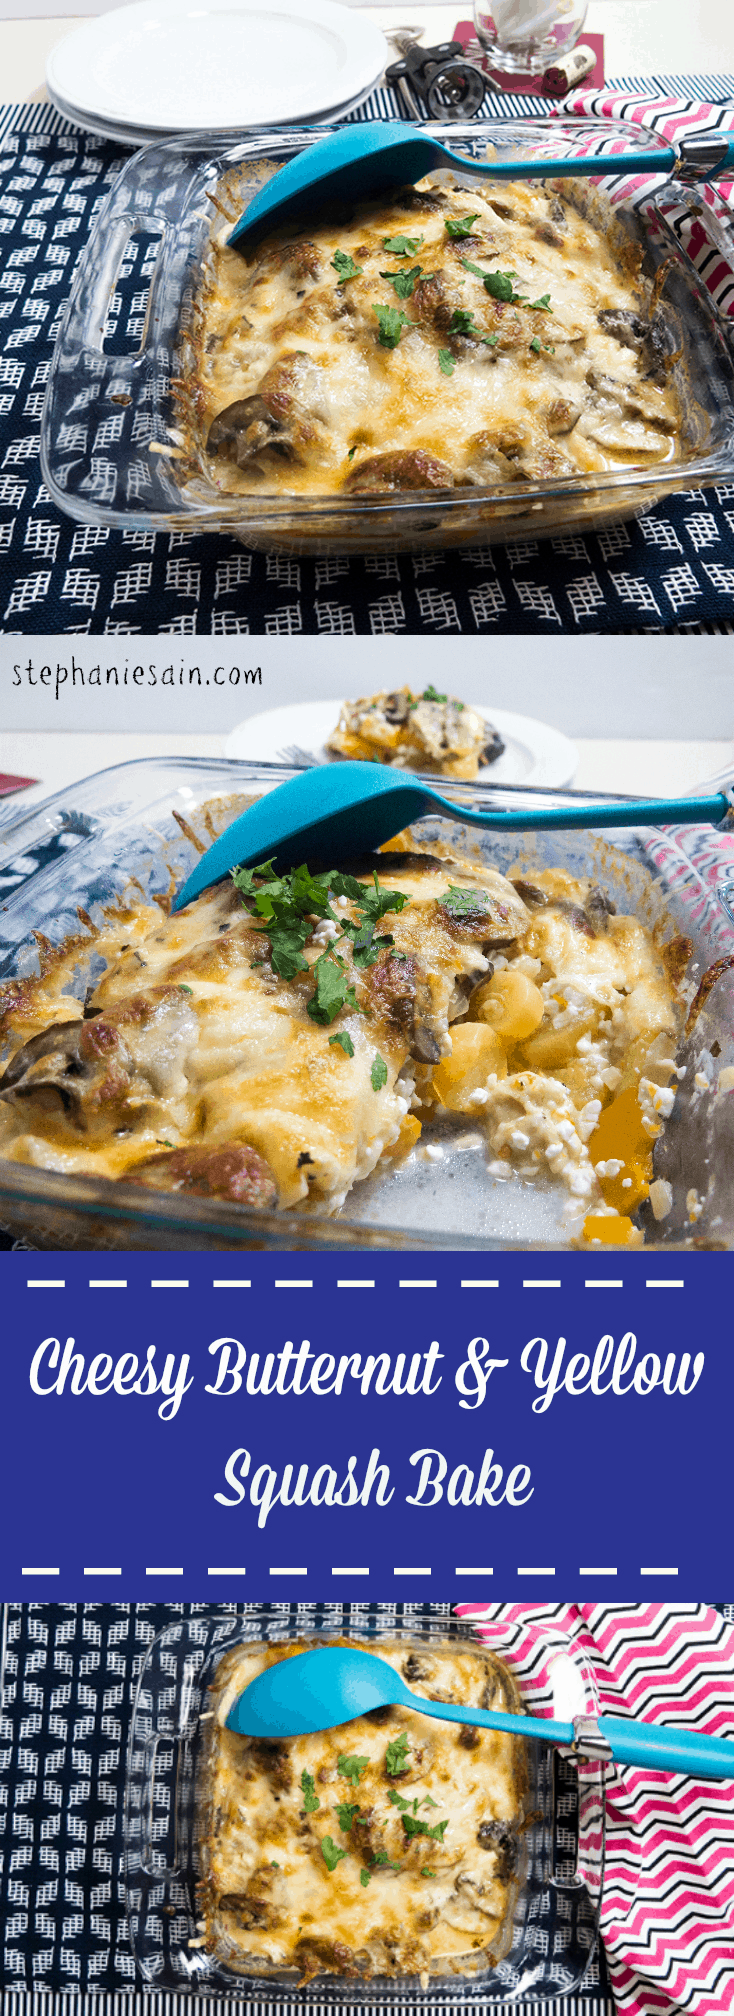 Cheesy Butternut & Yellow Squash Bake is a tasty, easy to prepare dinner that is both Vegetarian and Gluten Free.